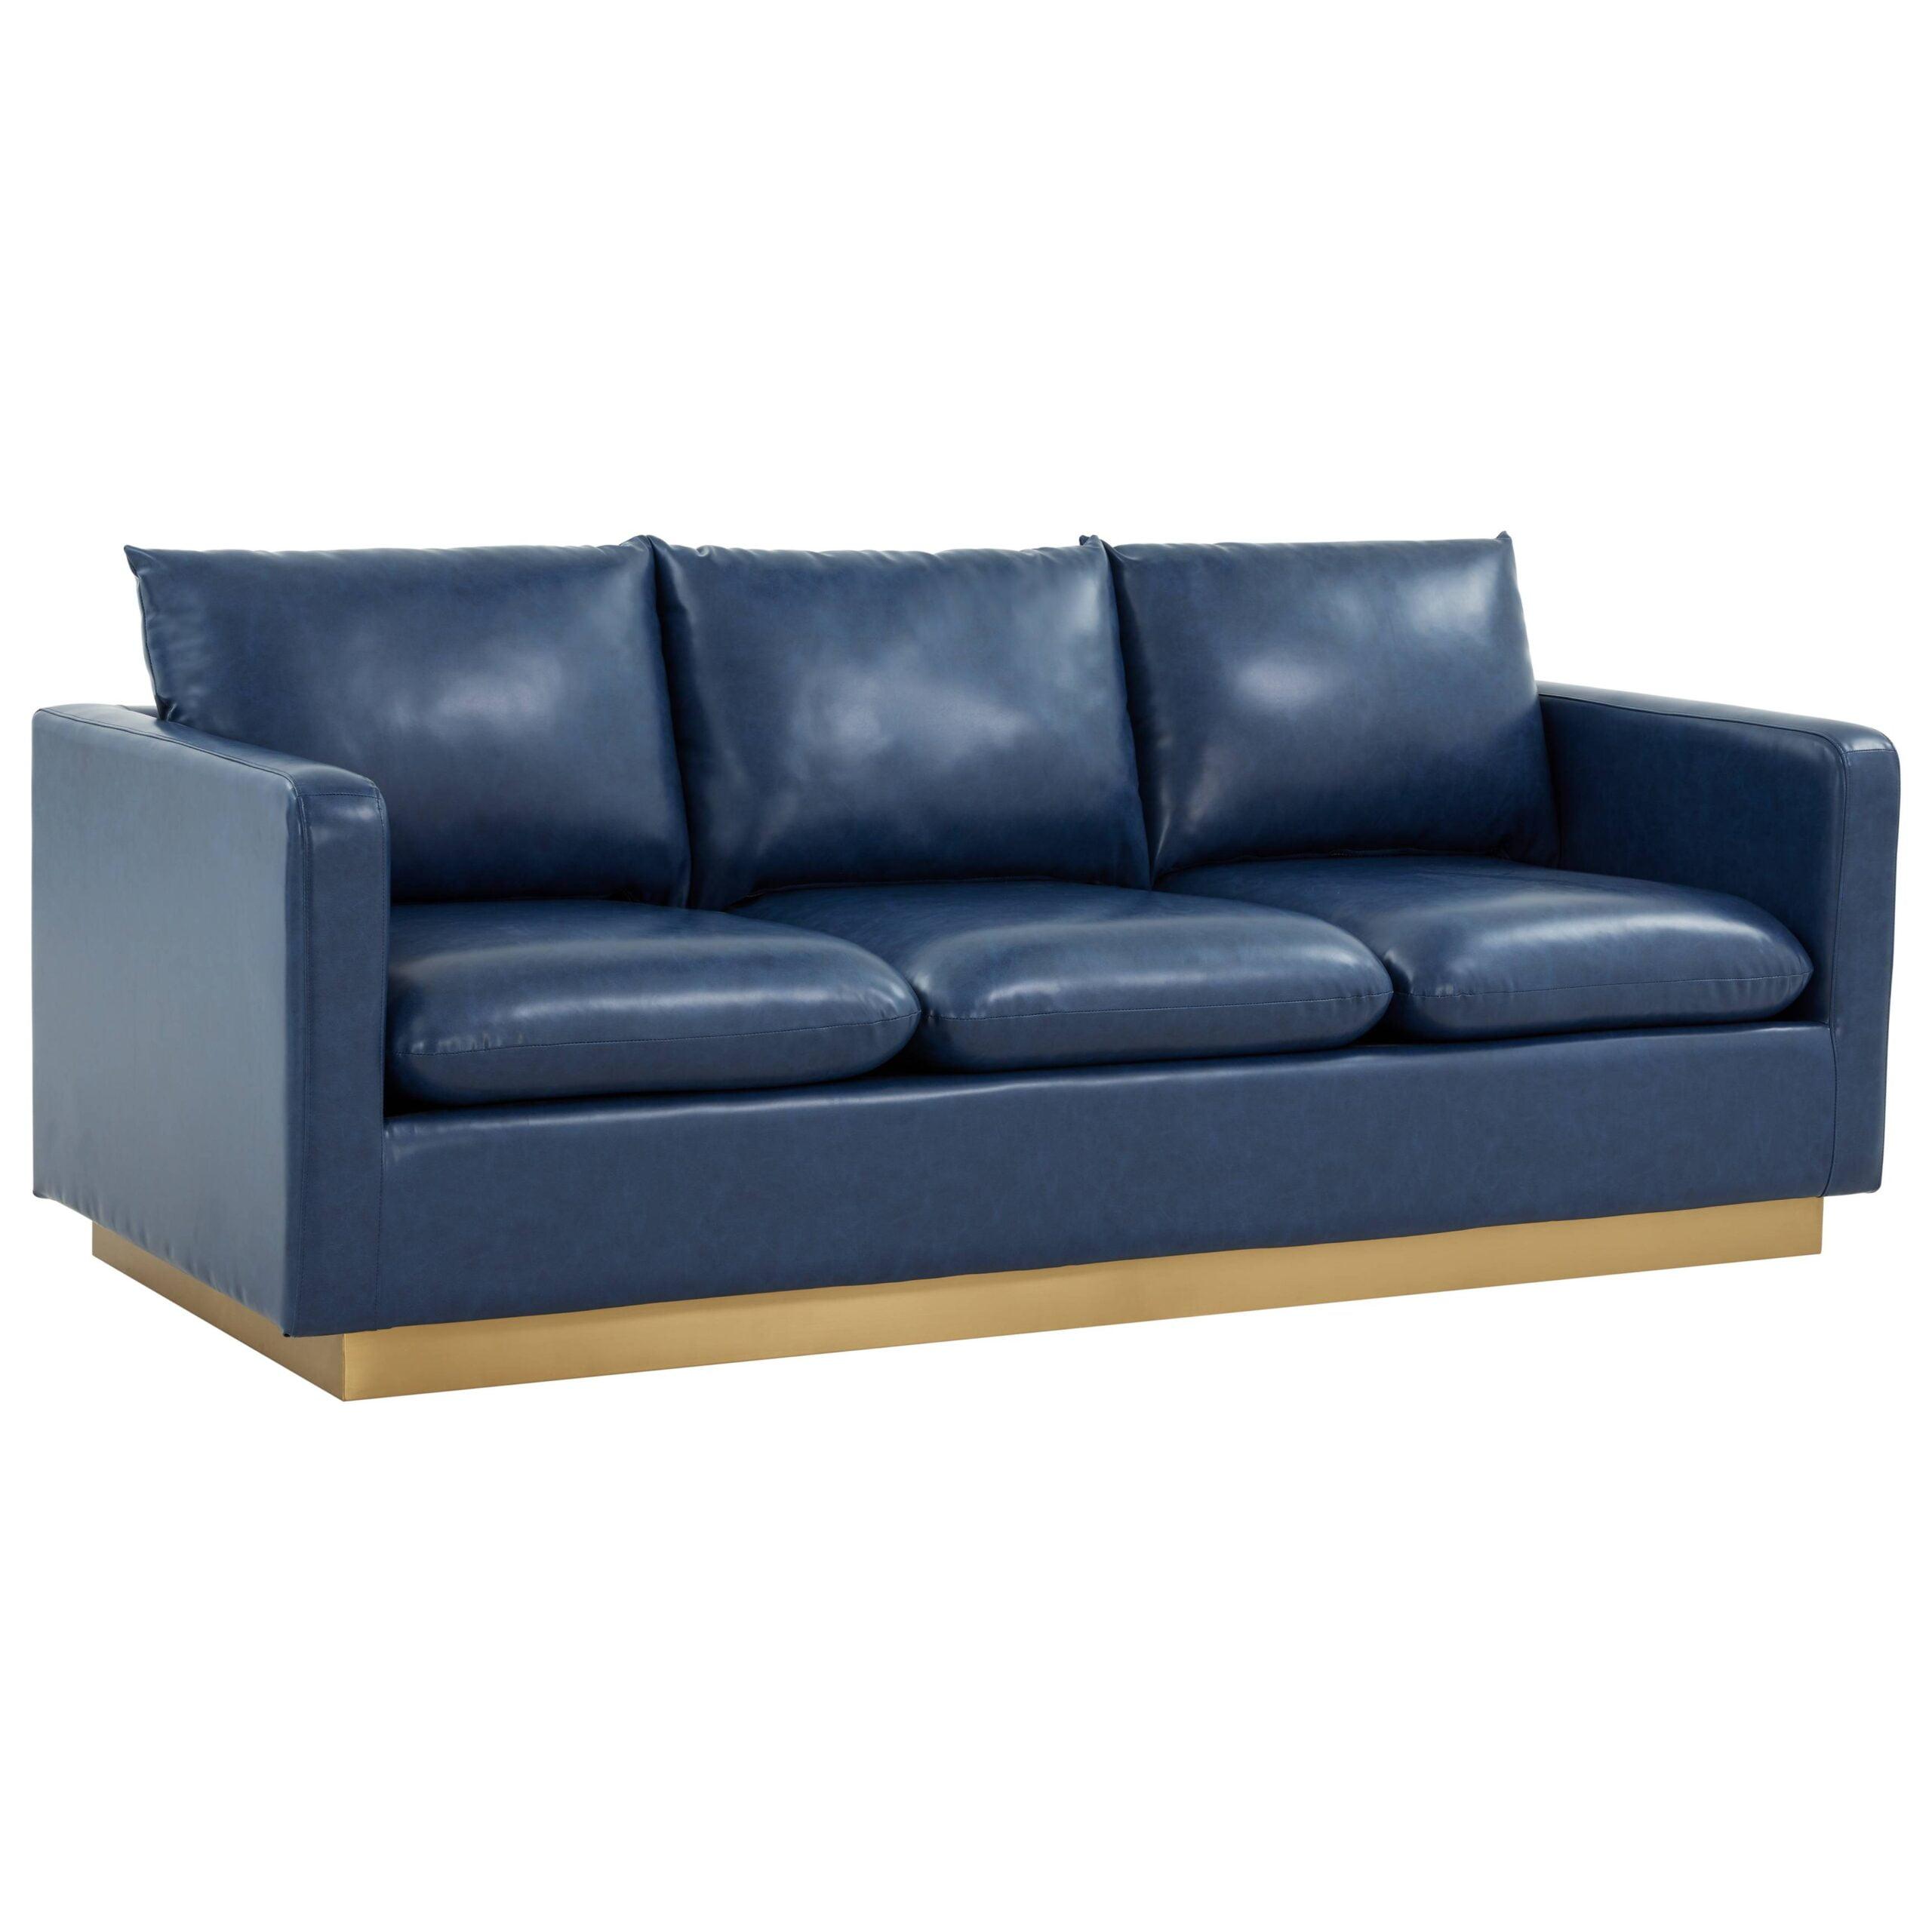 Modern Lawson Navy Blue Faux Leather Sofa with Wood Frame